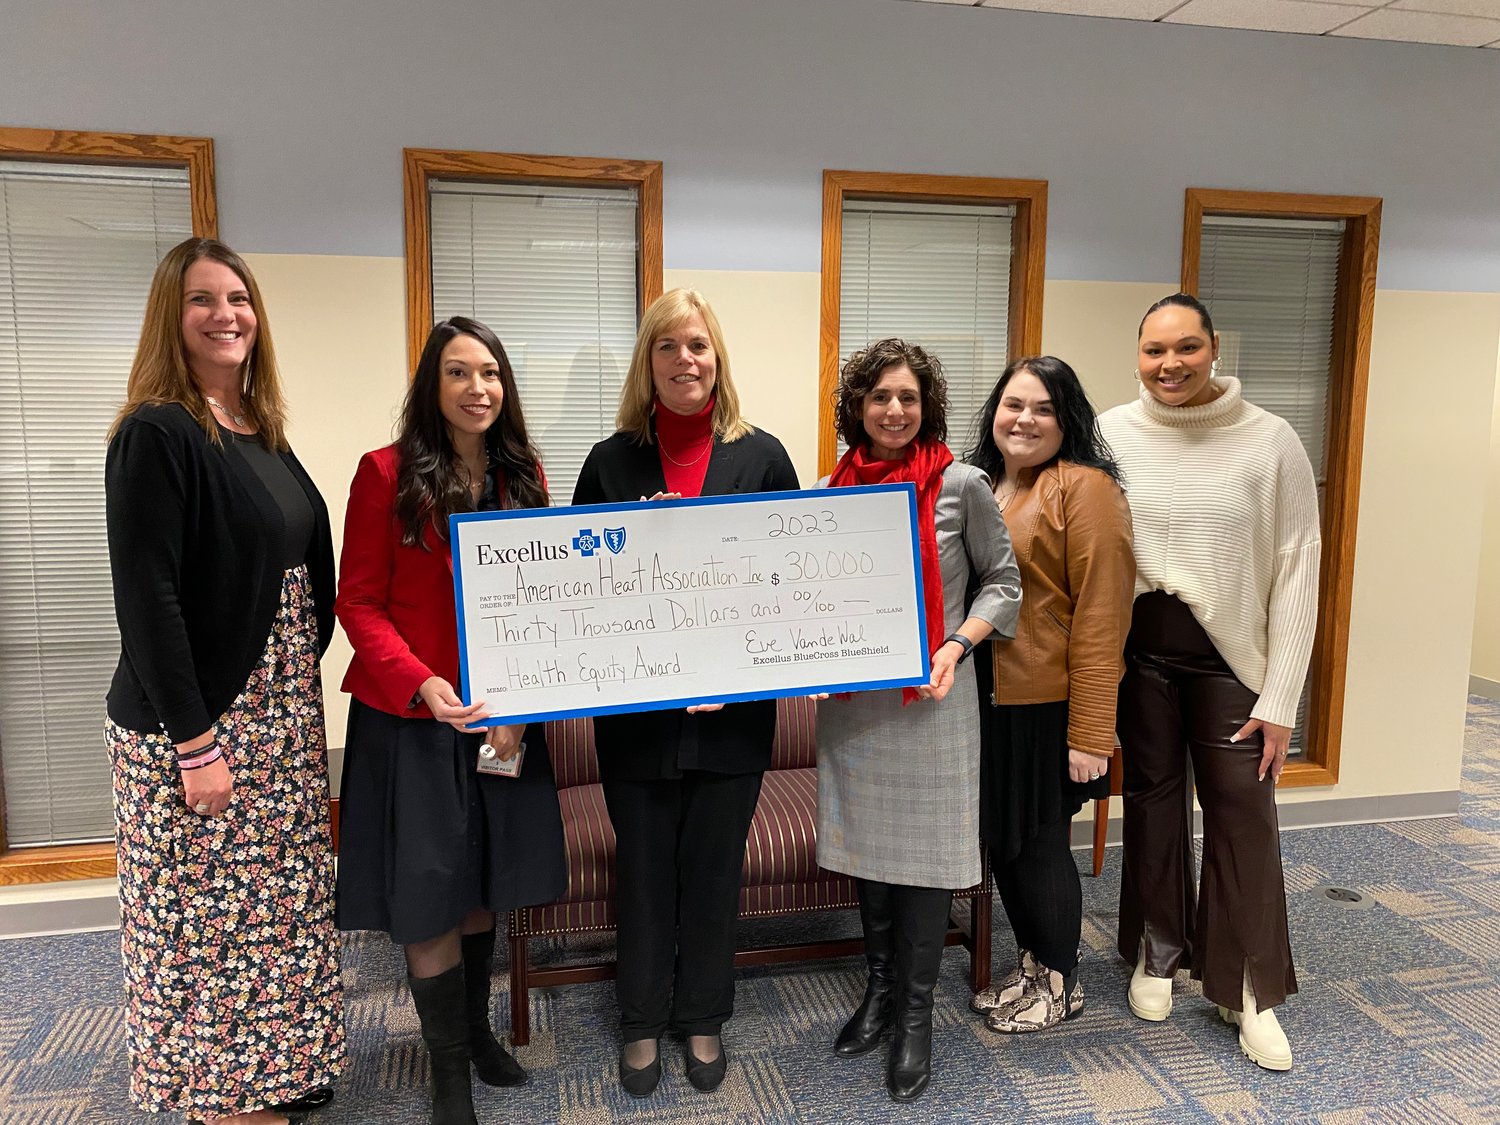 Shayna Keller, Excellus BCBS community investments and partnerships manager; Mackenzie Shorter, American Heart Association community impact director; Eve Van de Wal, Excellus BCBS regional president; Christine Kisiel, American Heart Association executive director; Marianne Hagadorn, American Heart Association development director; and Tionna DeFreitas, American Heart Association development coordinator gather for a check presentation.